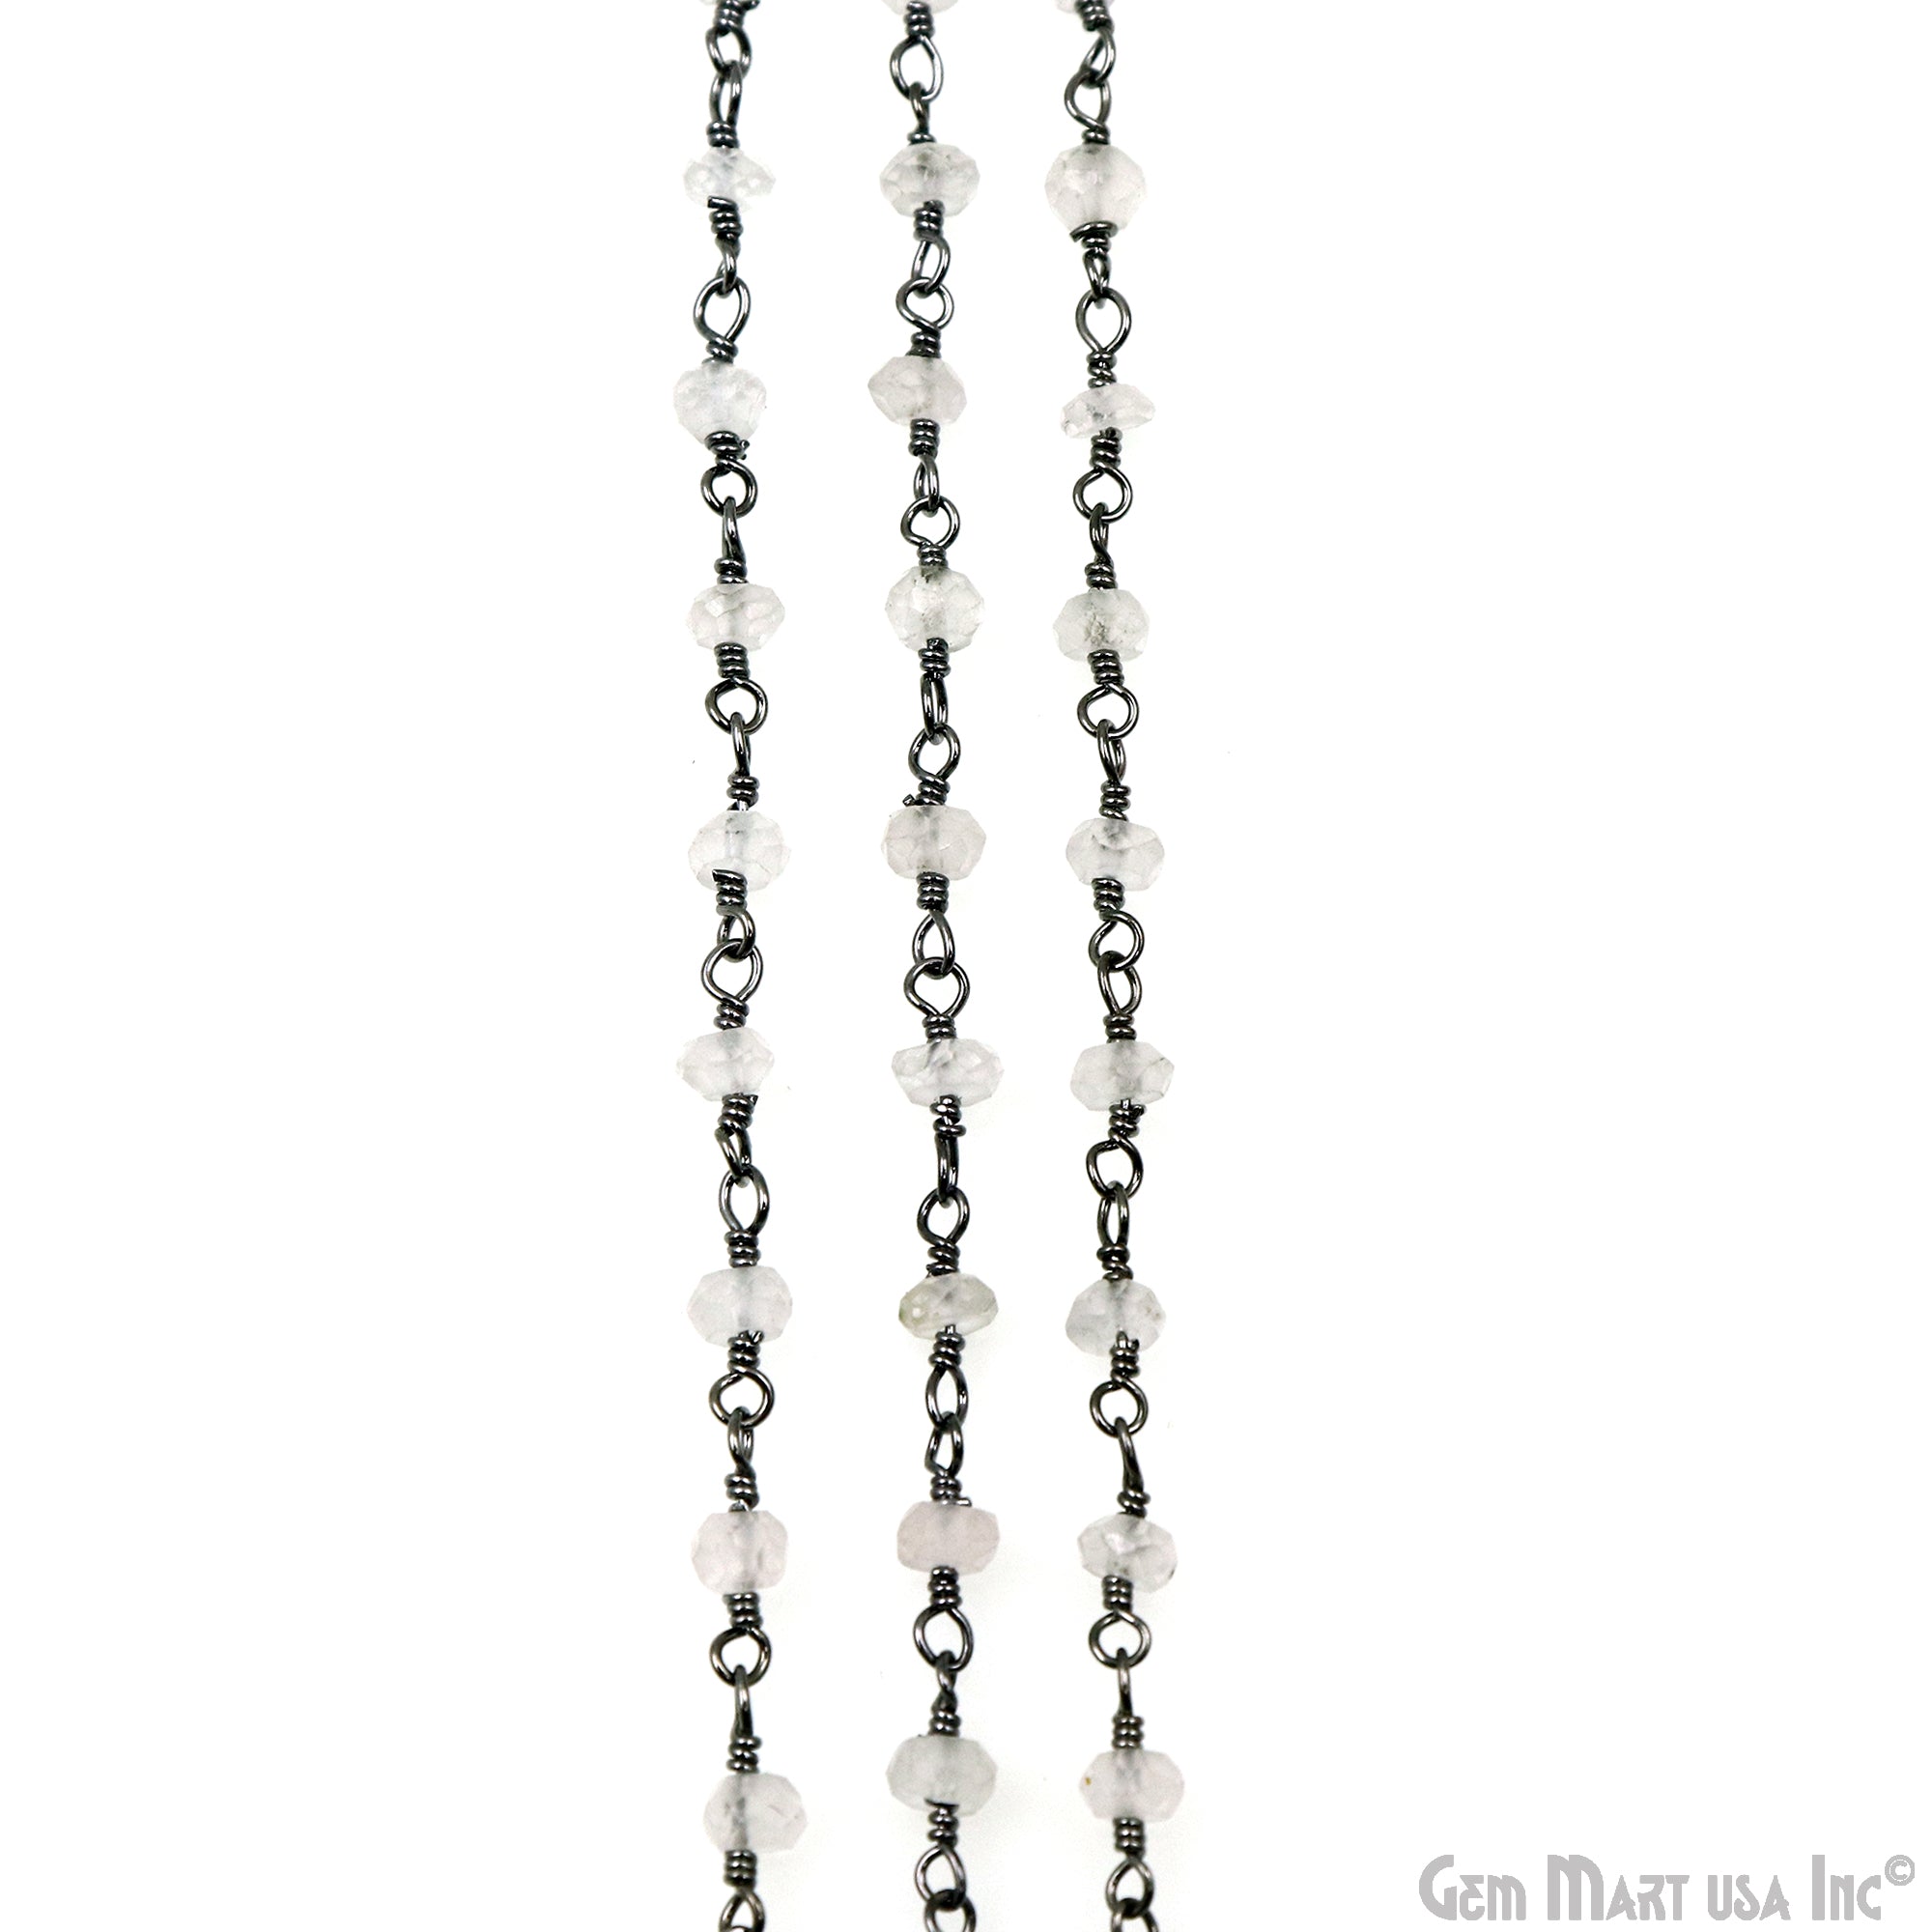 Crystal 3-3.5mm Oxidized Wire Wrapped Beads Rosary Chain